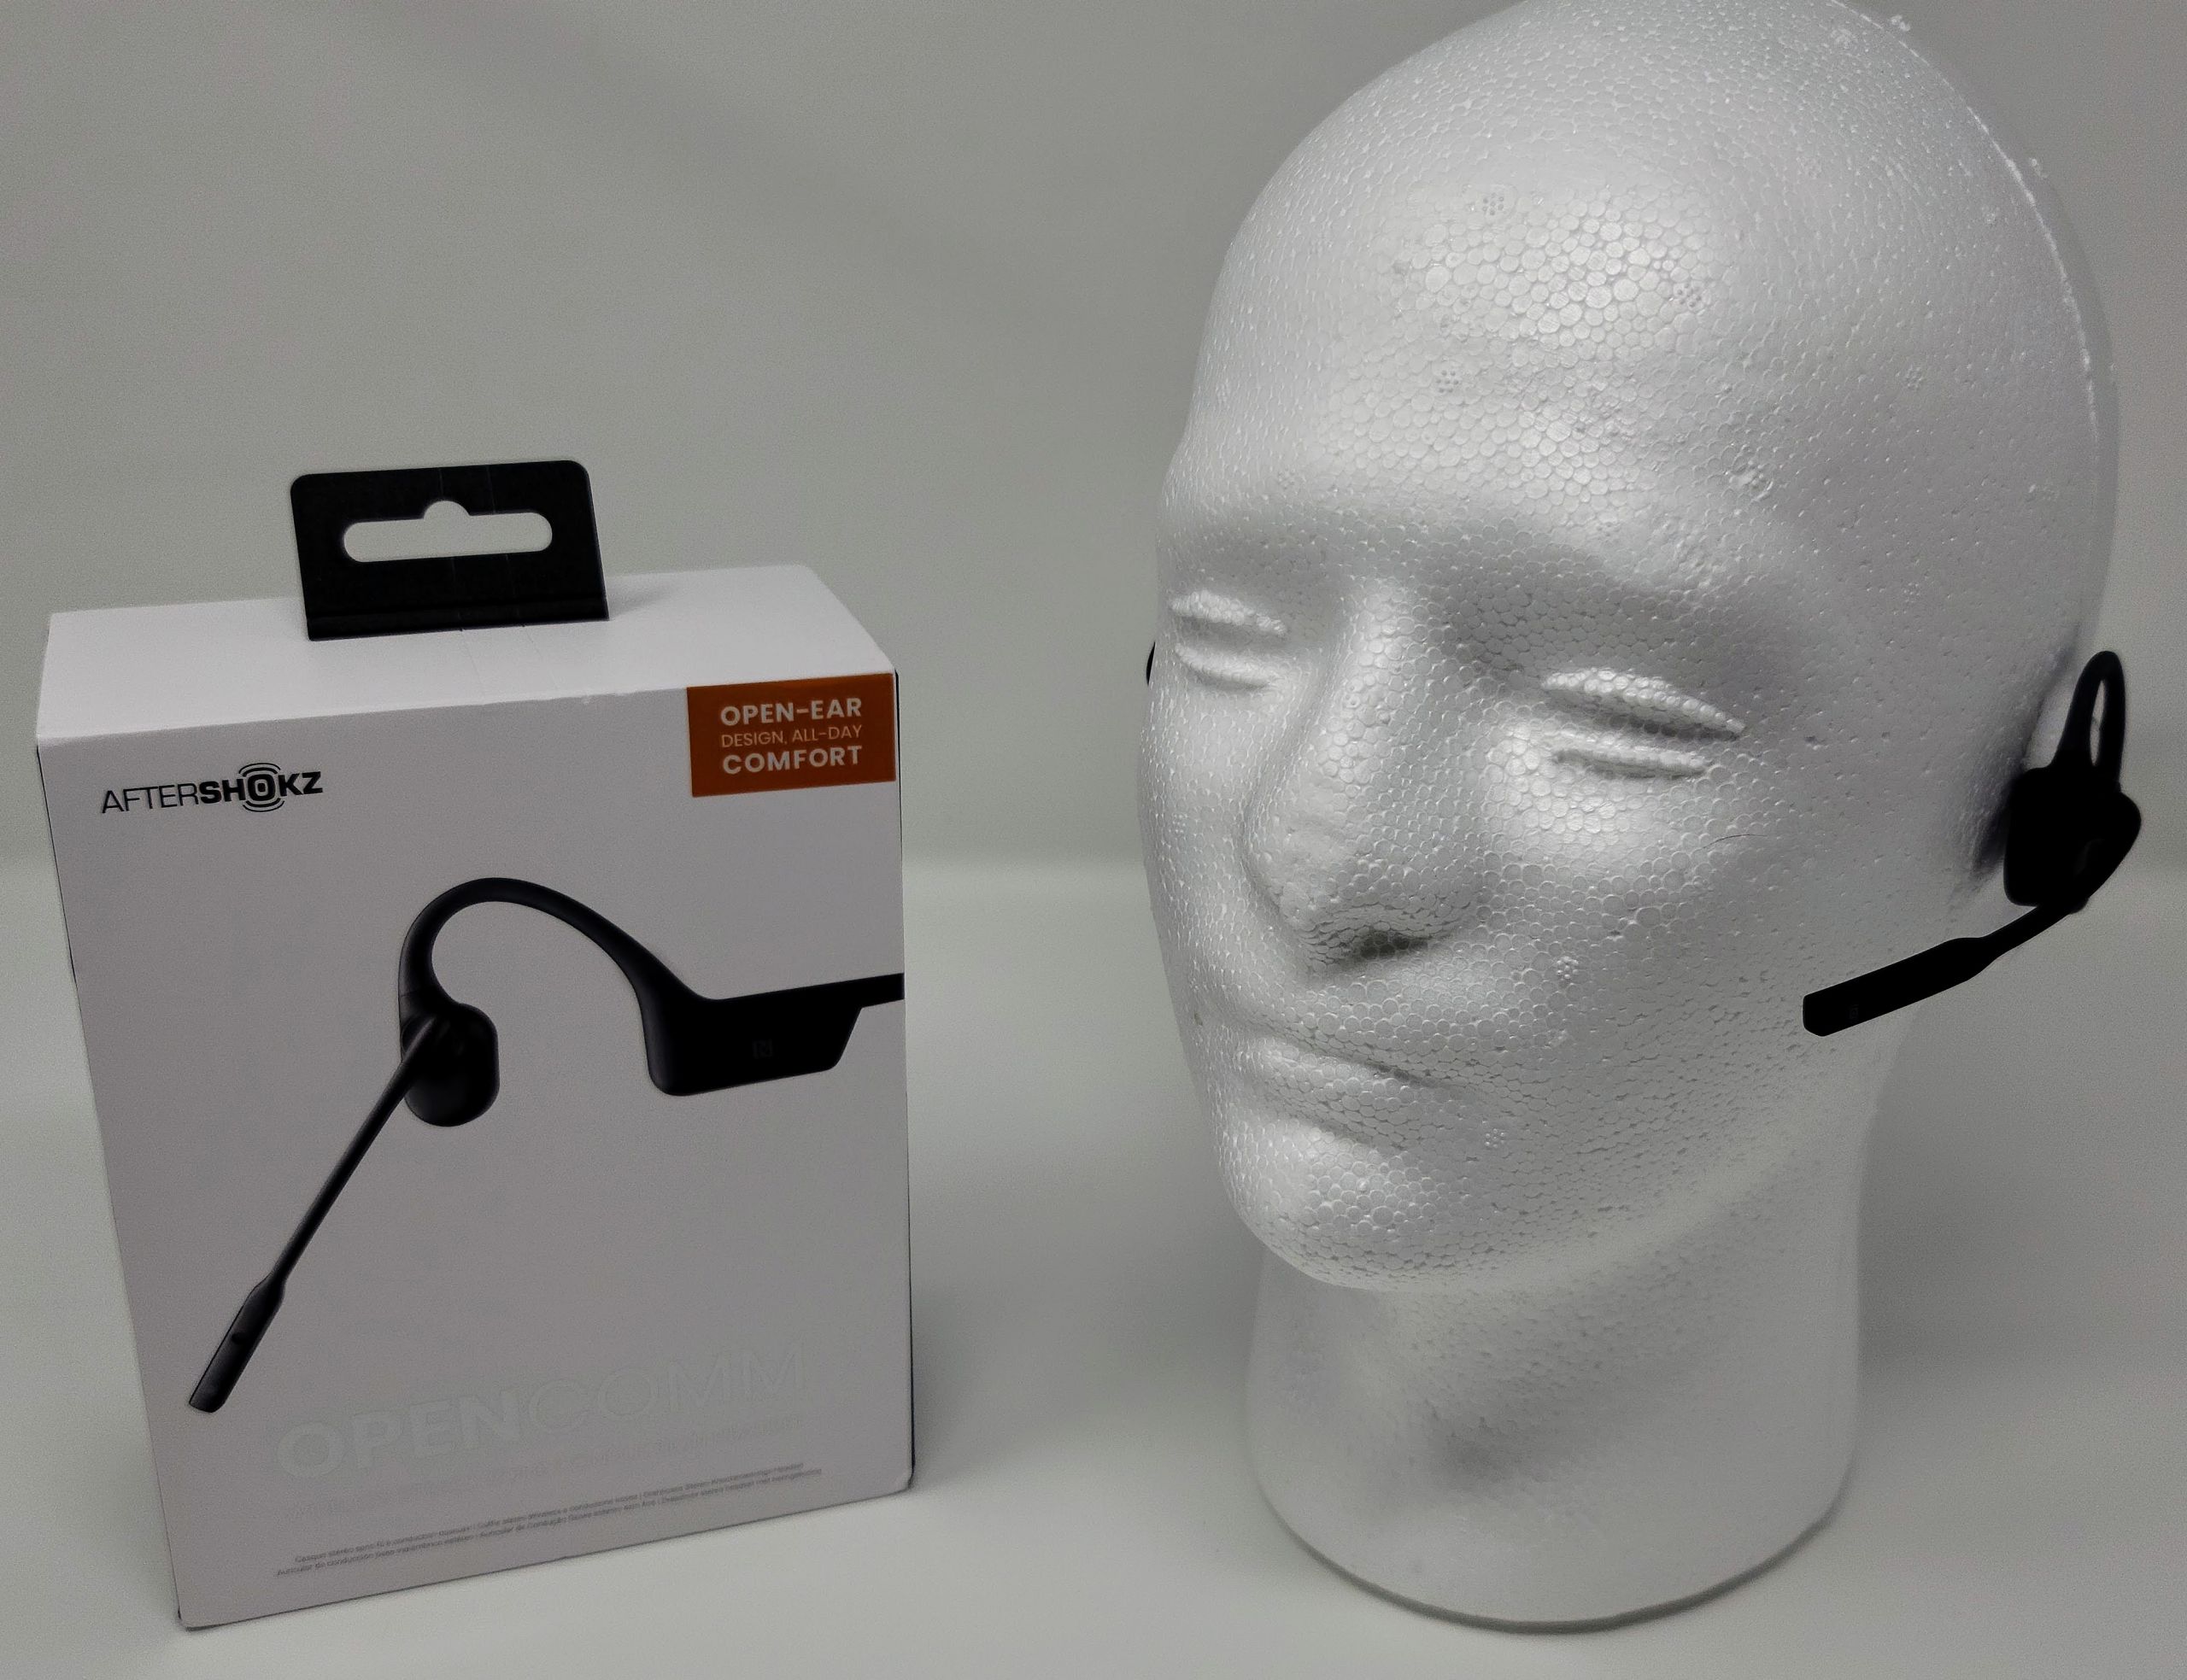 AfterShokz OpenComm headset review - The Gadgeteer